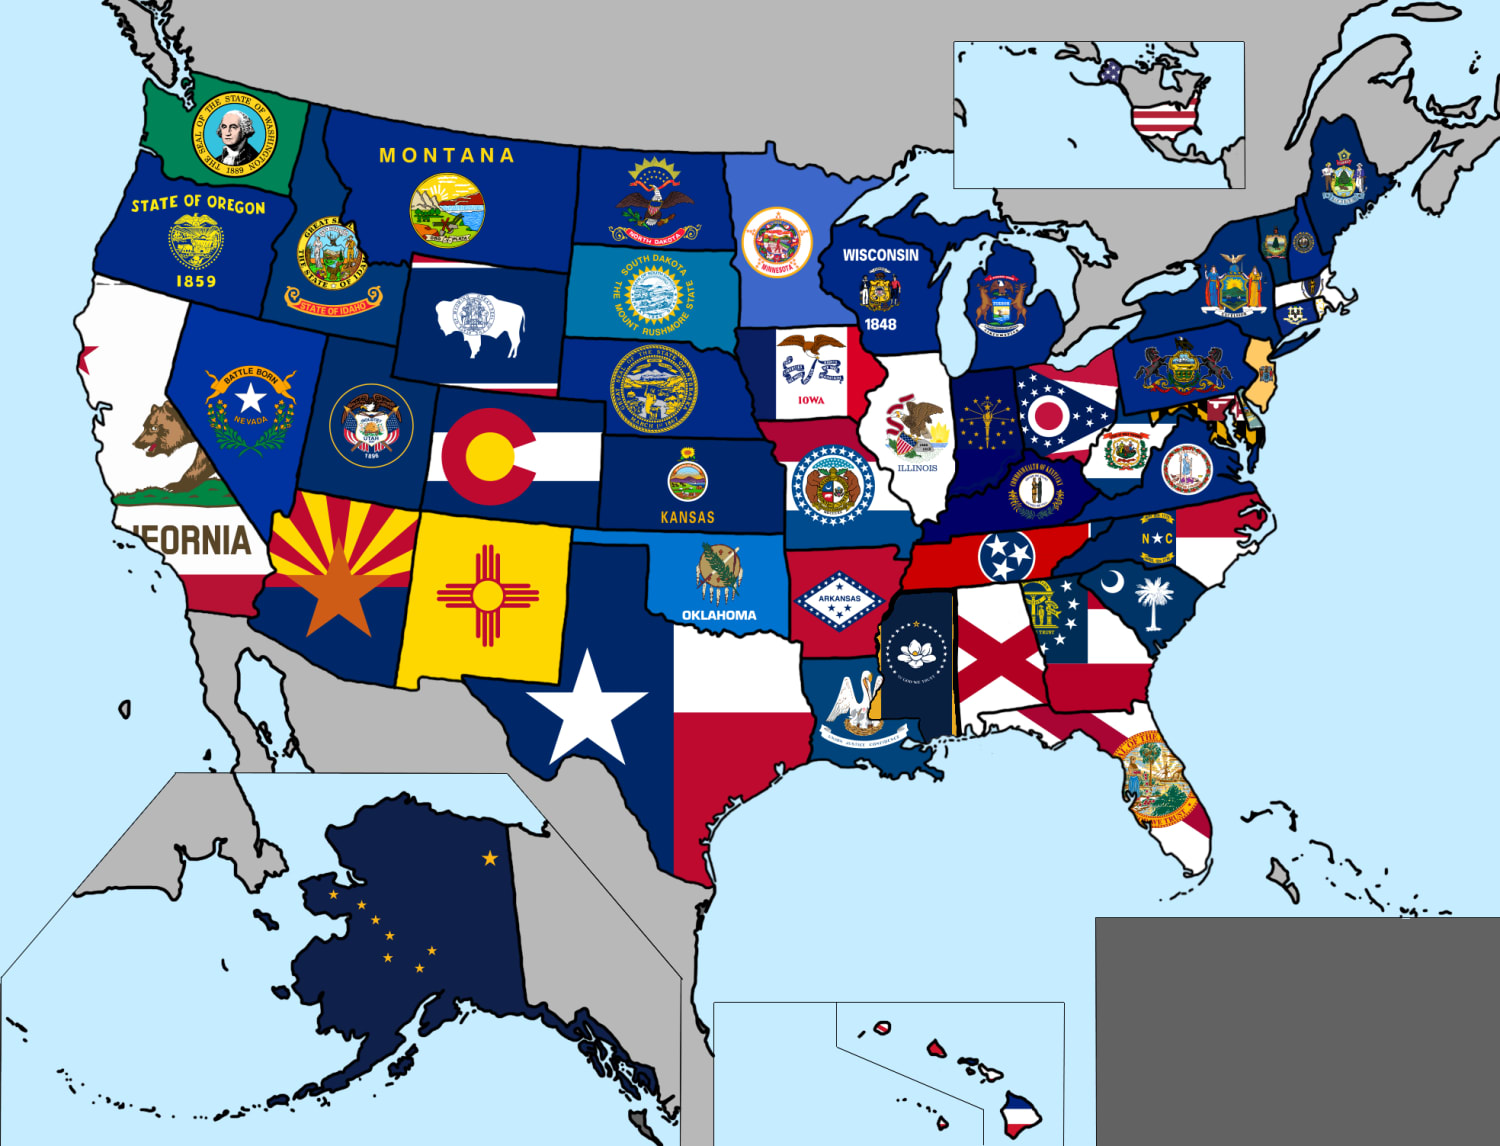 USA State Flag Map with New Magnolia Flag and fixed burgee